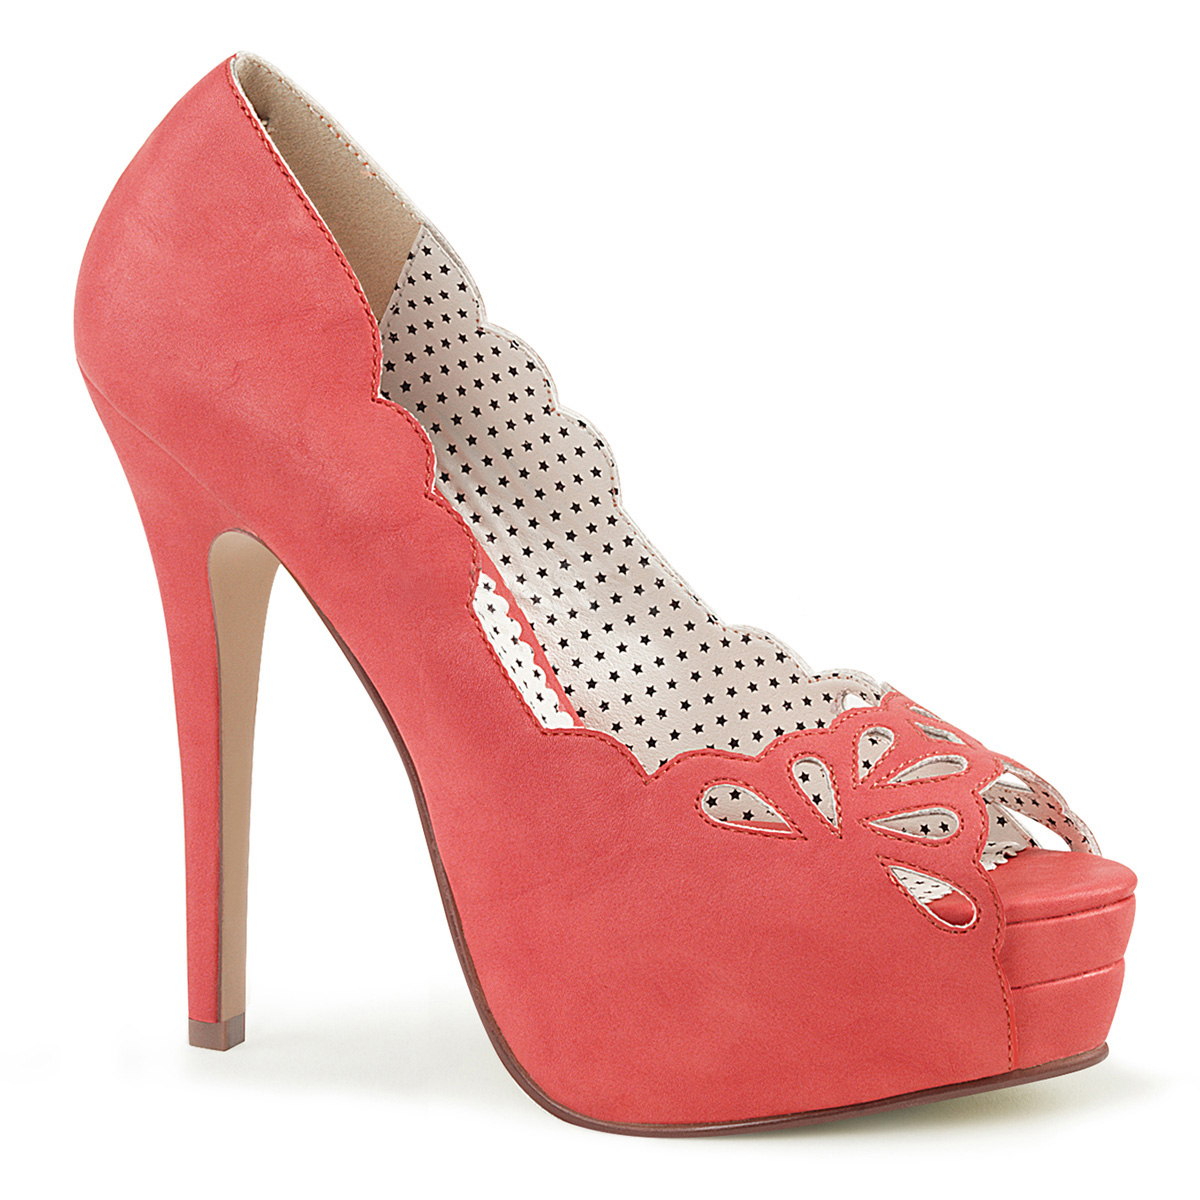 Stunning Coral High Heels by Nine West